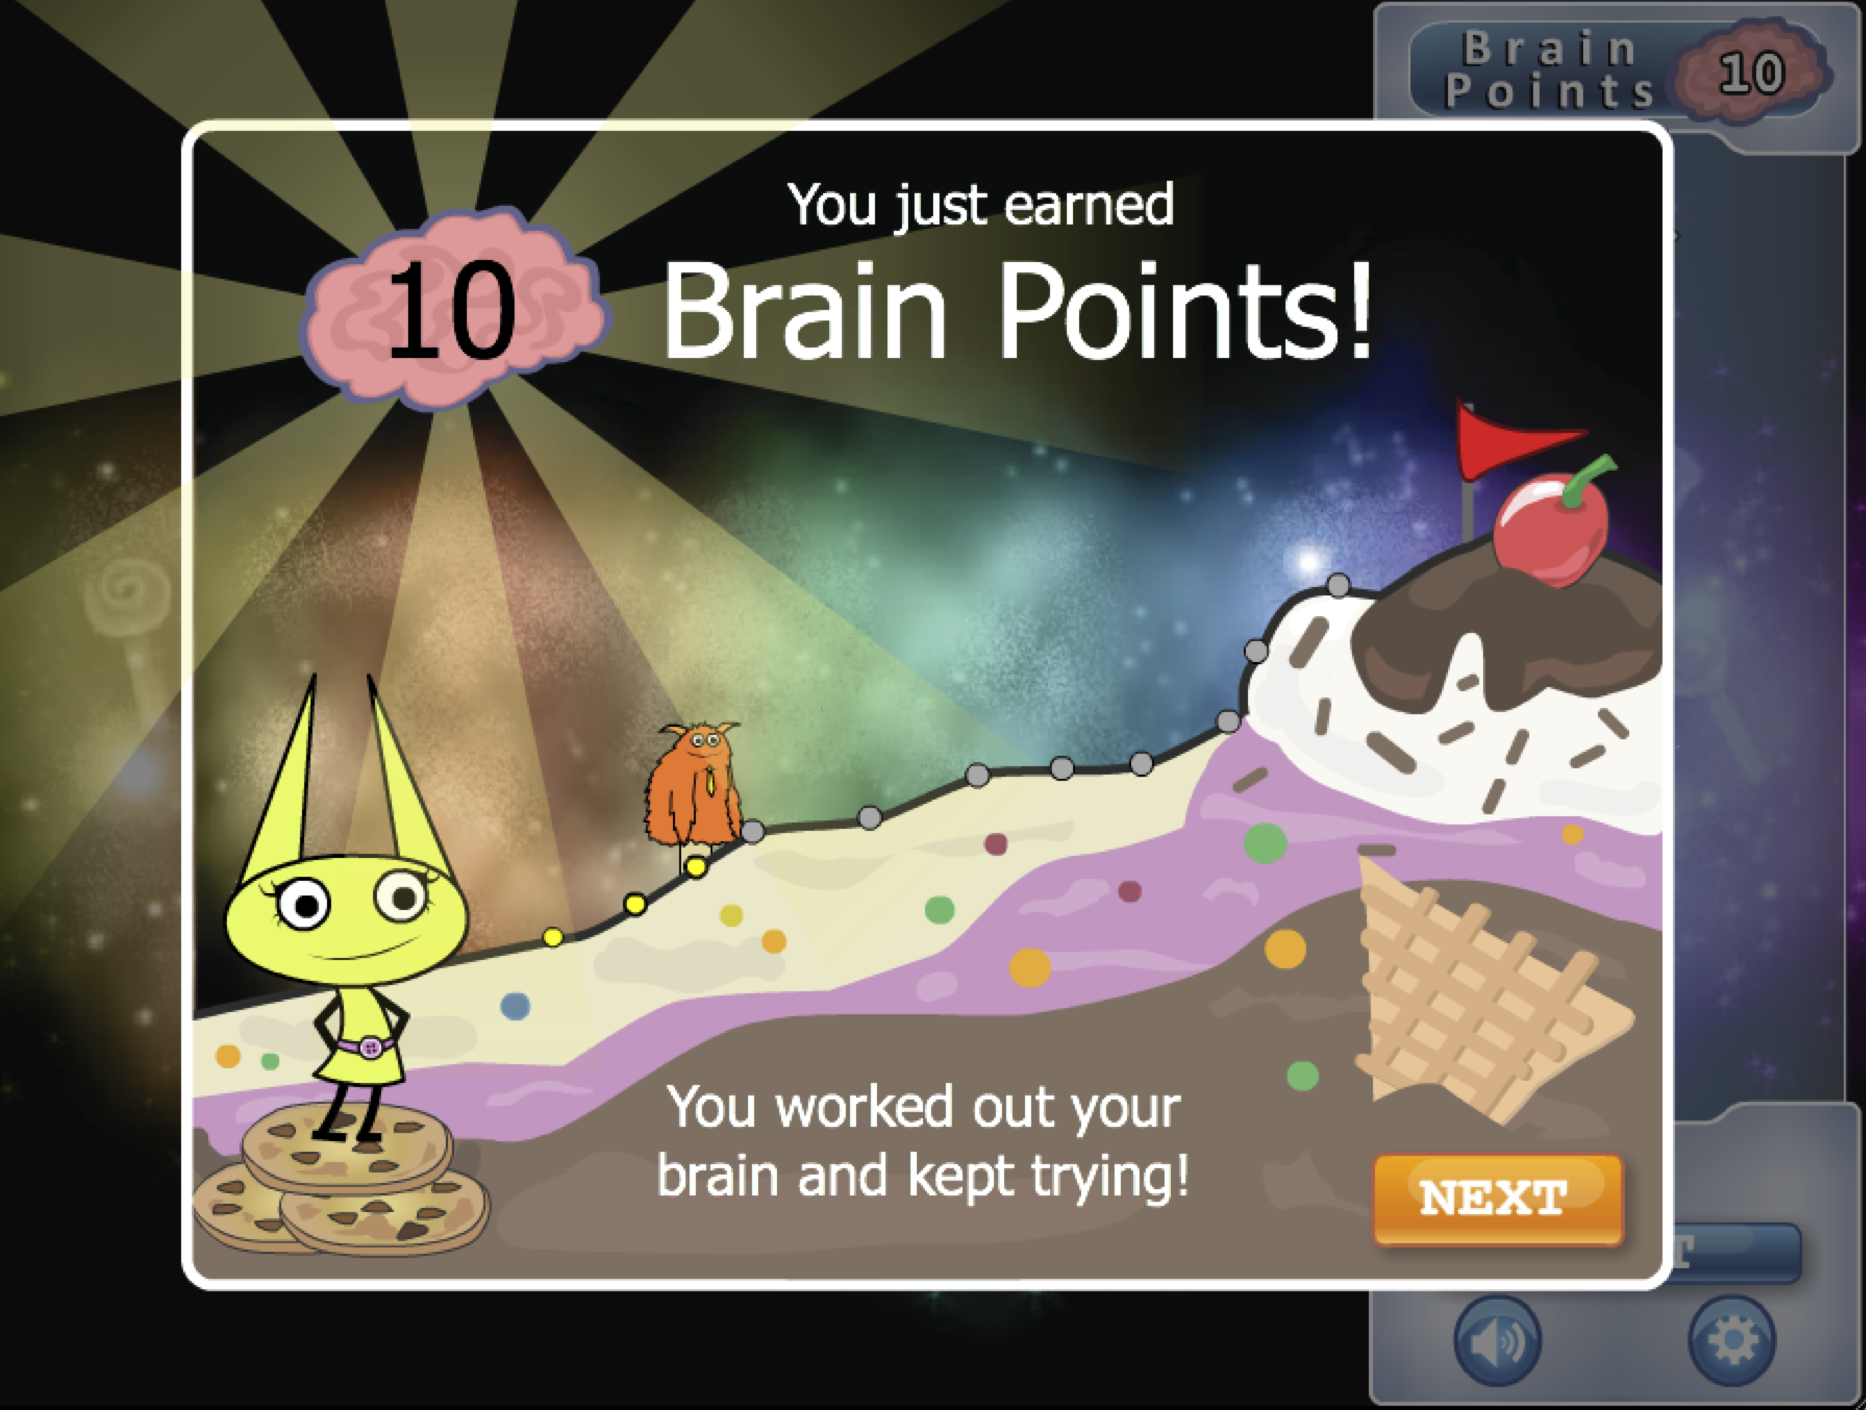 Brain Points: A Growth Mindset Reward Structure Boosts Player Persistence!